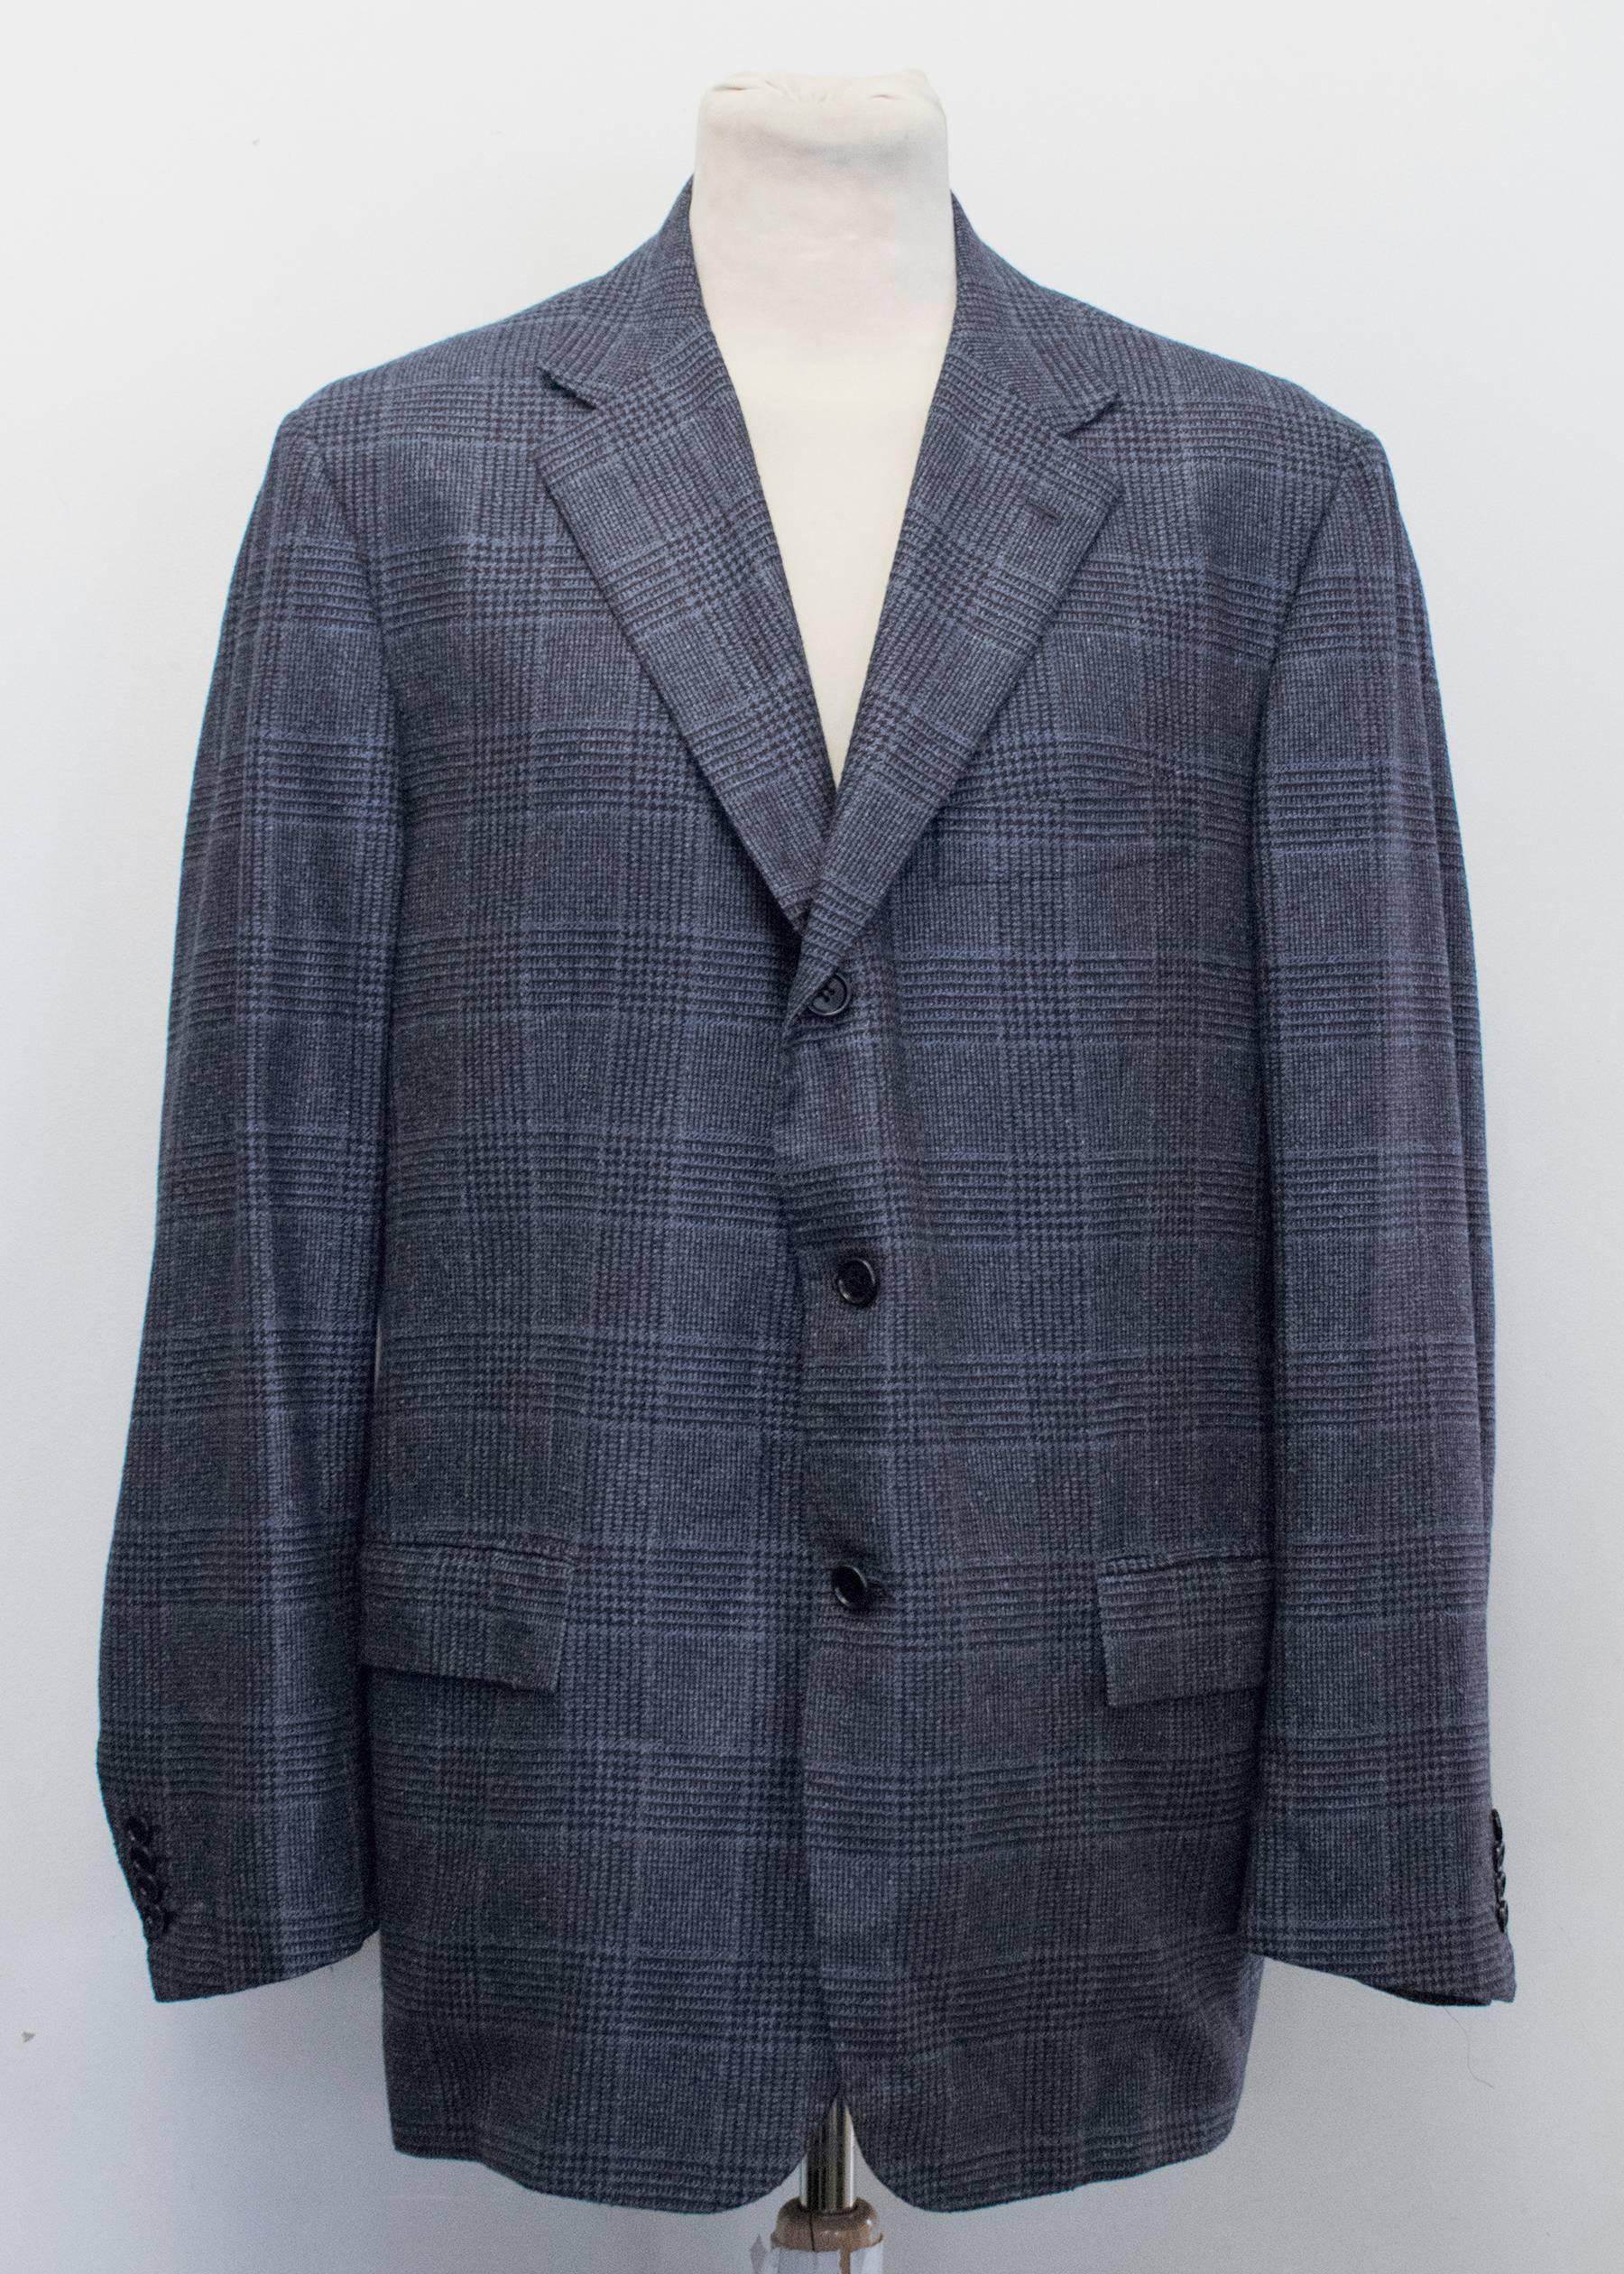 Kiton for Jean Jacques blue and black checked jacket. Shoulder pads. Notch lapels. Two functional flap pockets on the front. Two interior pockets with button enclosure. Three buttons down the centre. Medium weight. 

Condition: 10/10

Measurements: